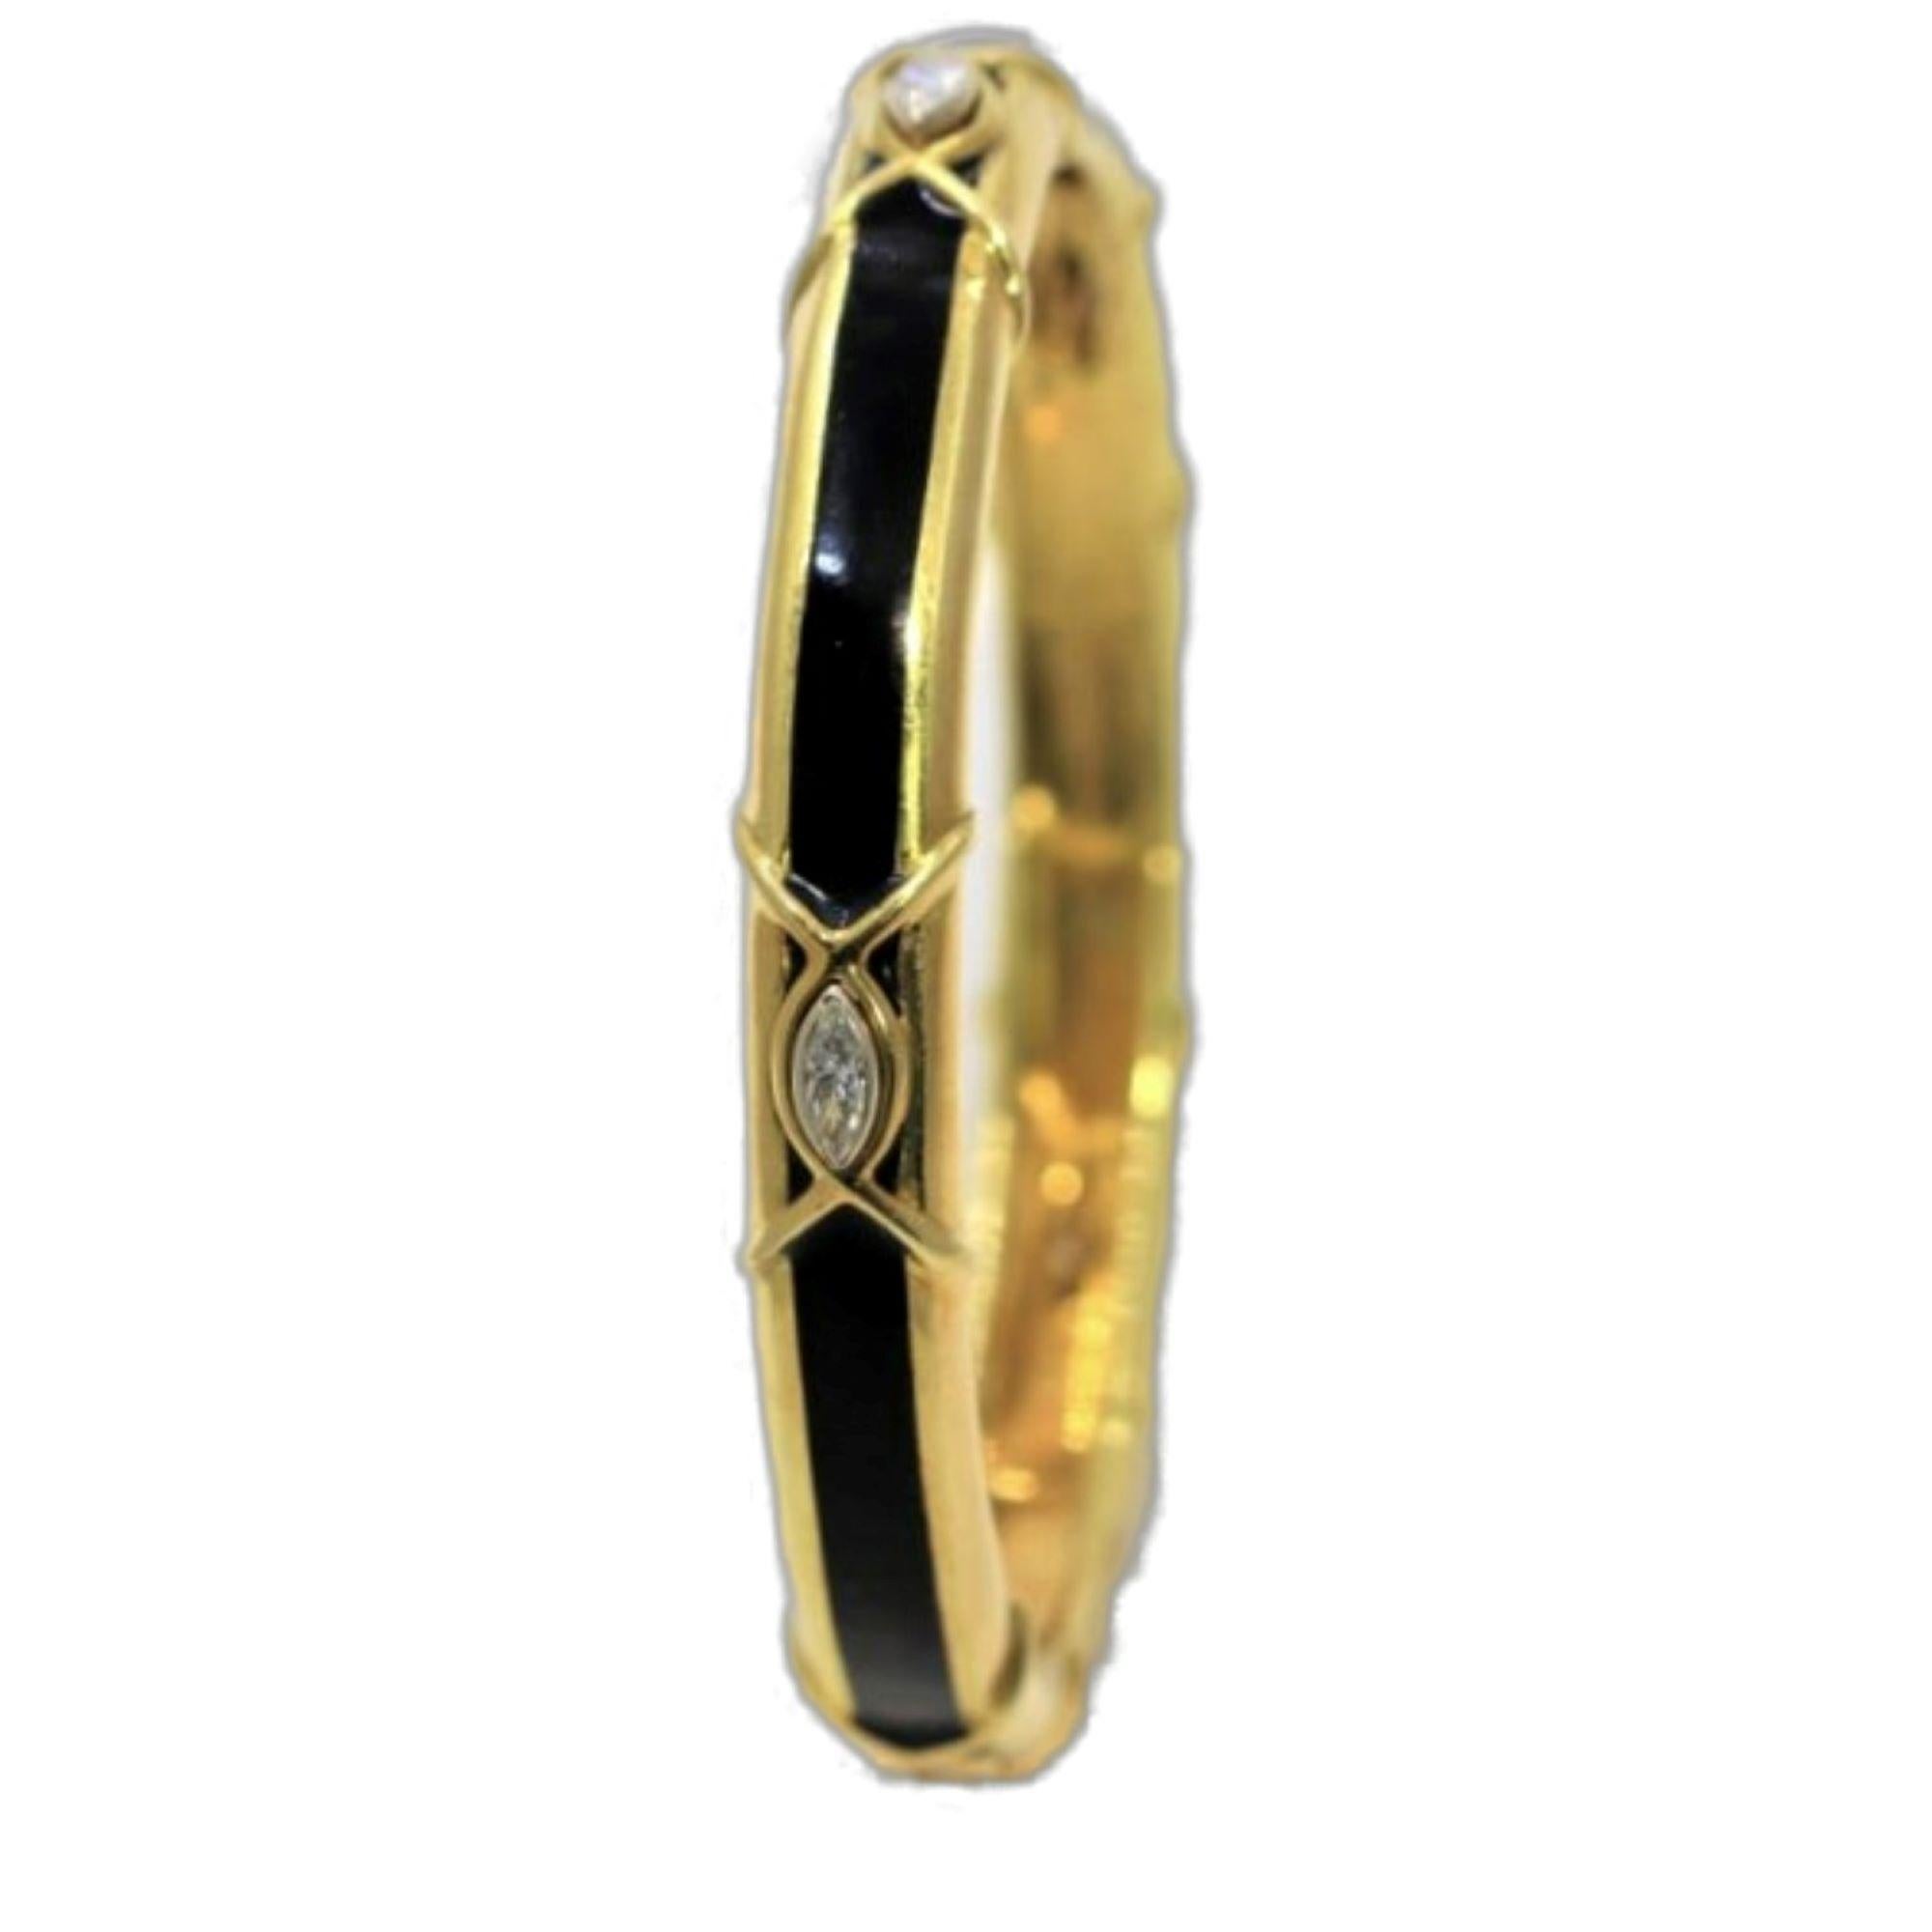 This distinctive and stylish bangle bracelet is crafted in 18k yellow gold and features a bold strip of black enamel punctuated by four fine quality marquise diamonds with a total approximate weight of 1.00ct. At 9.5mm in width it is a stand alone